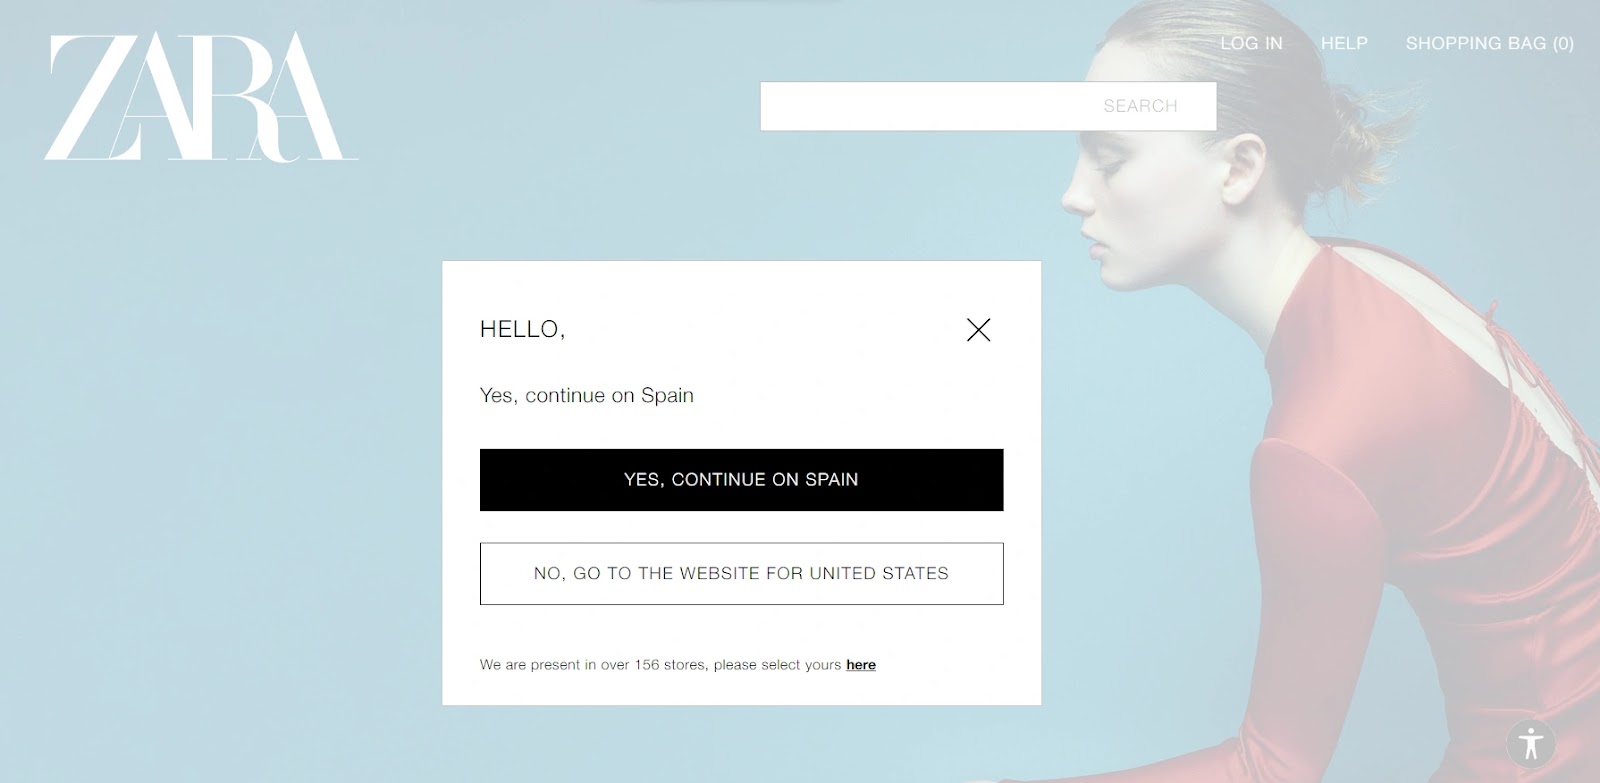 Pop up window on Zara's site asking users if they want to continue to Spain or go to the US site